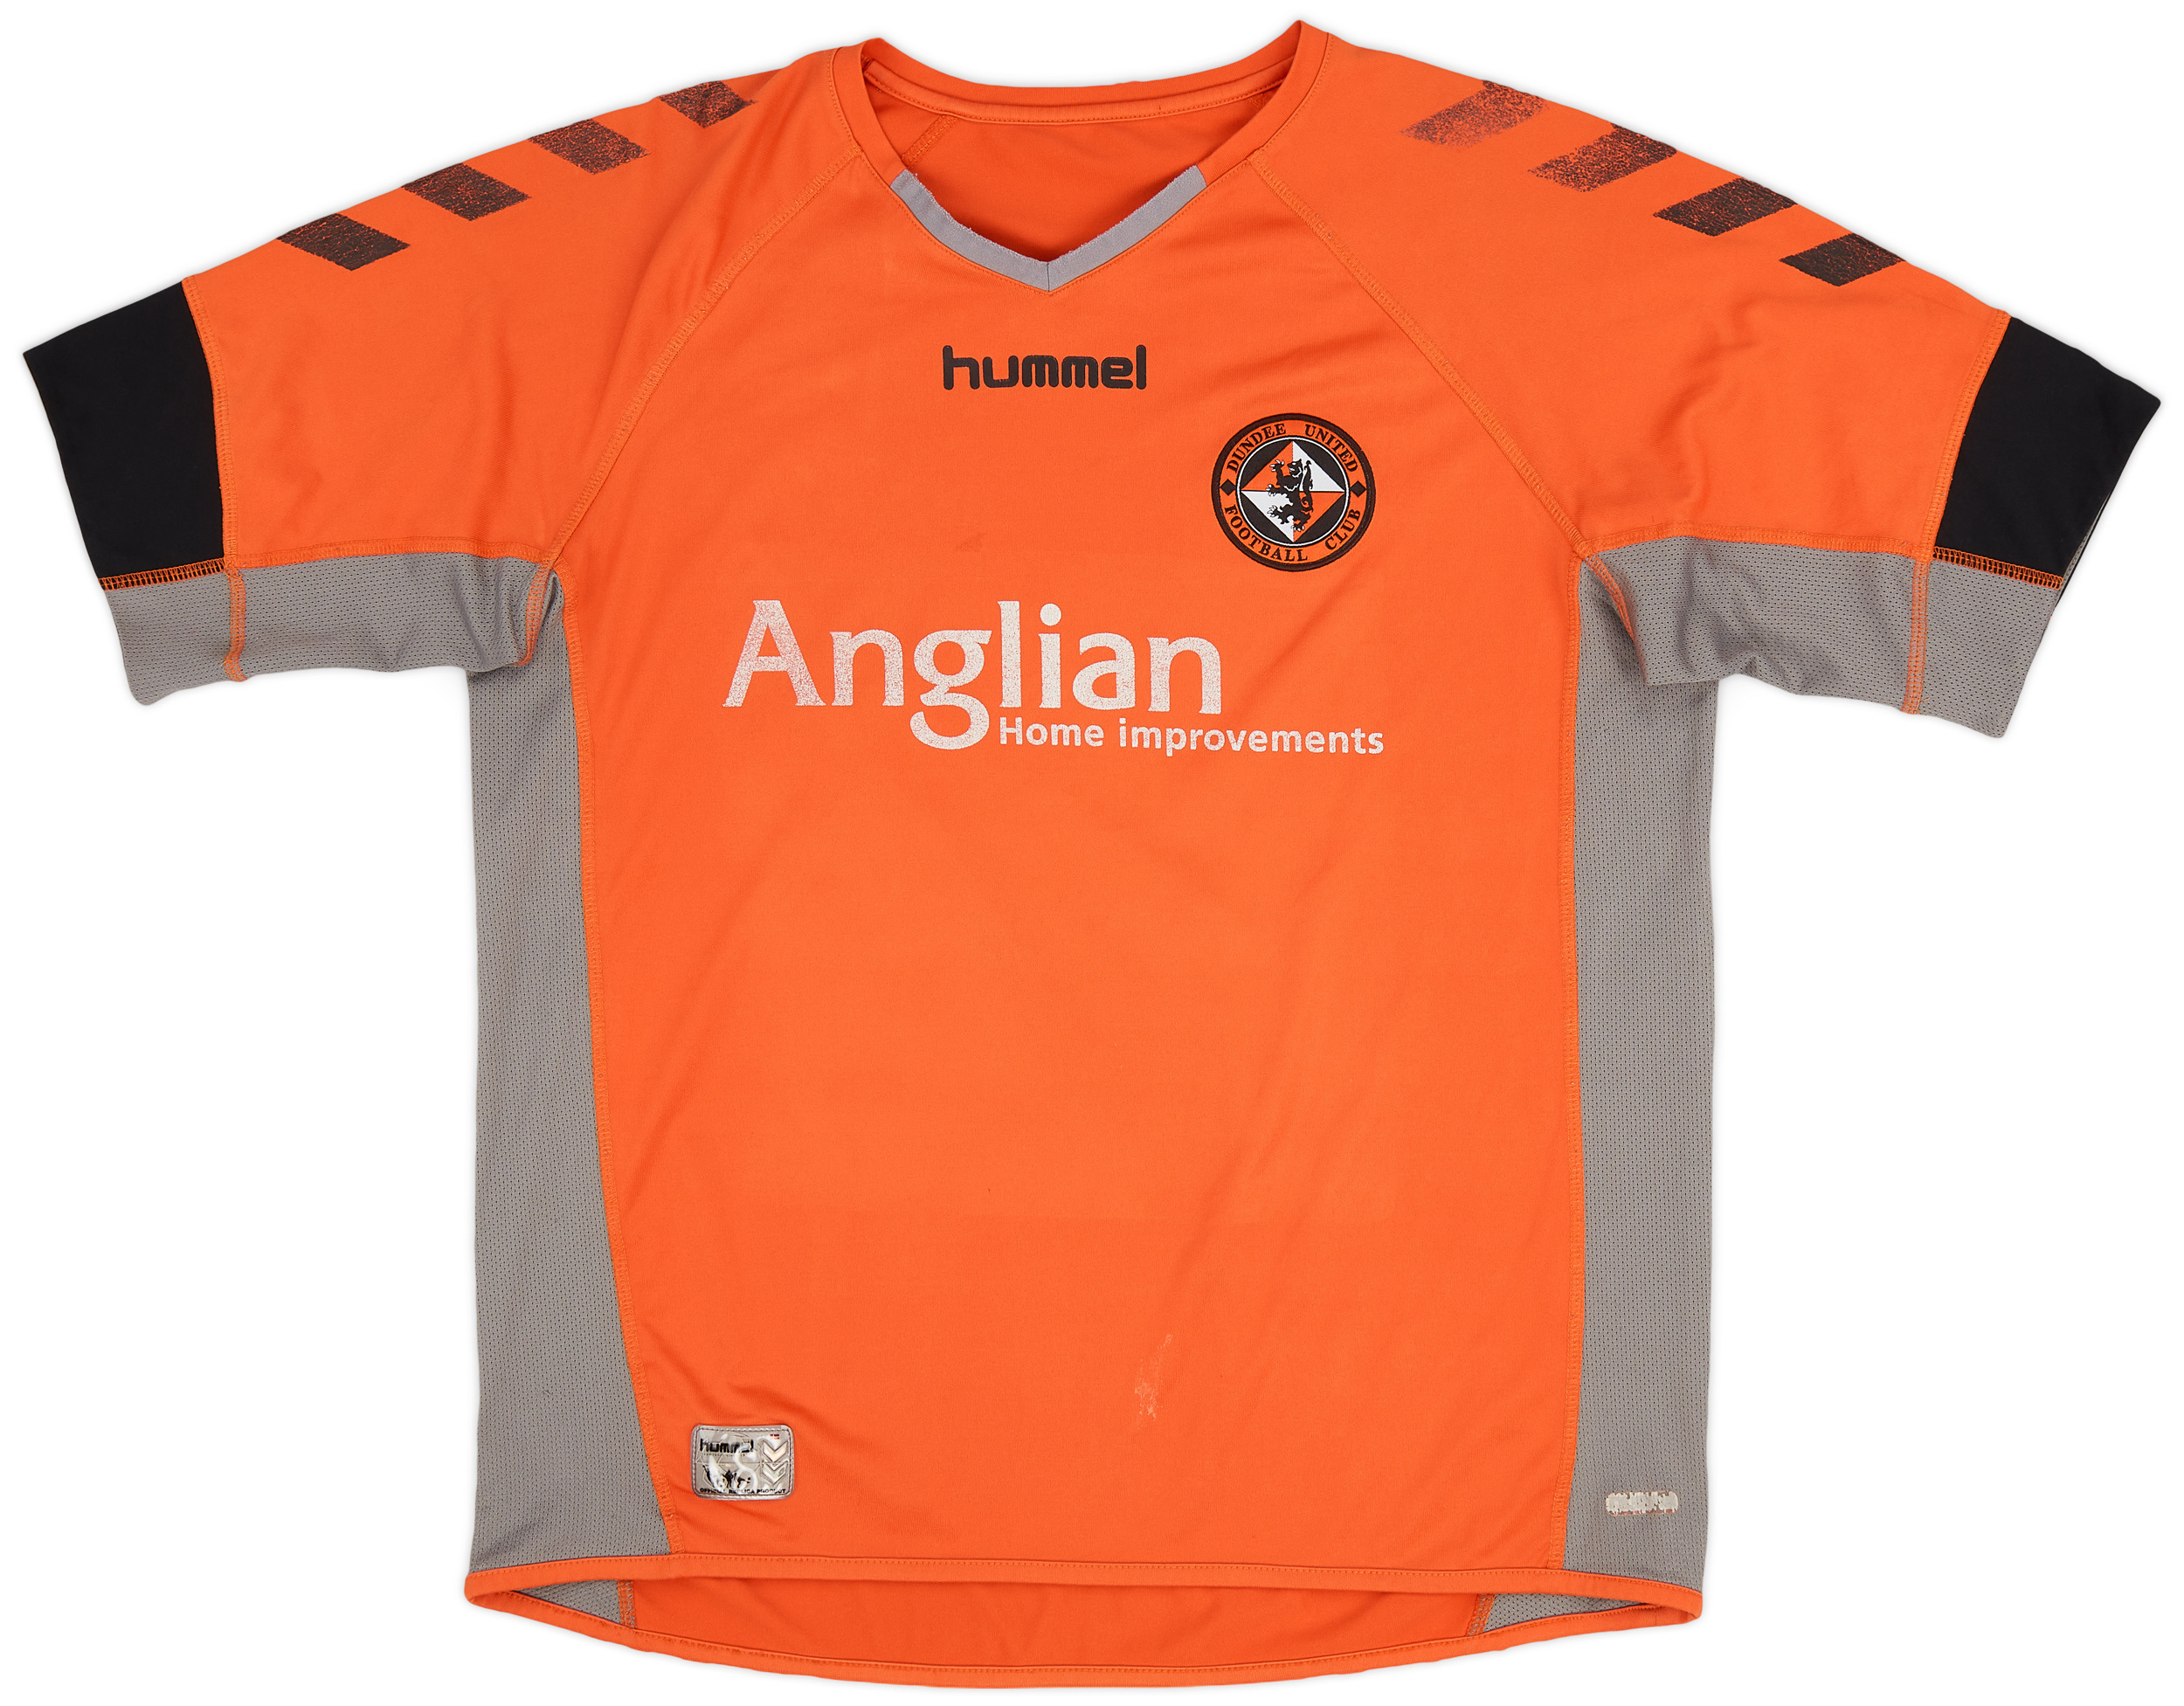 2006-07 Dundee United Home Shirt - 6/10 - ()